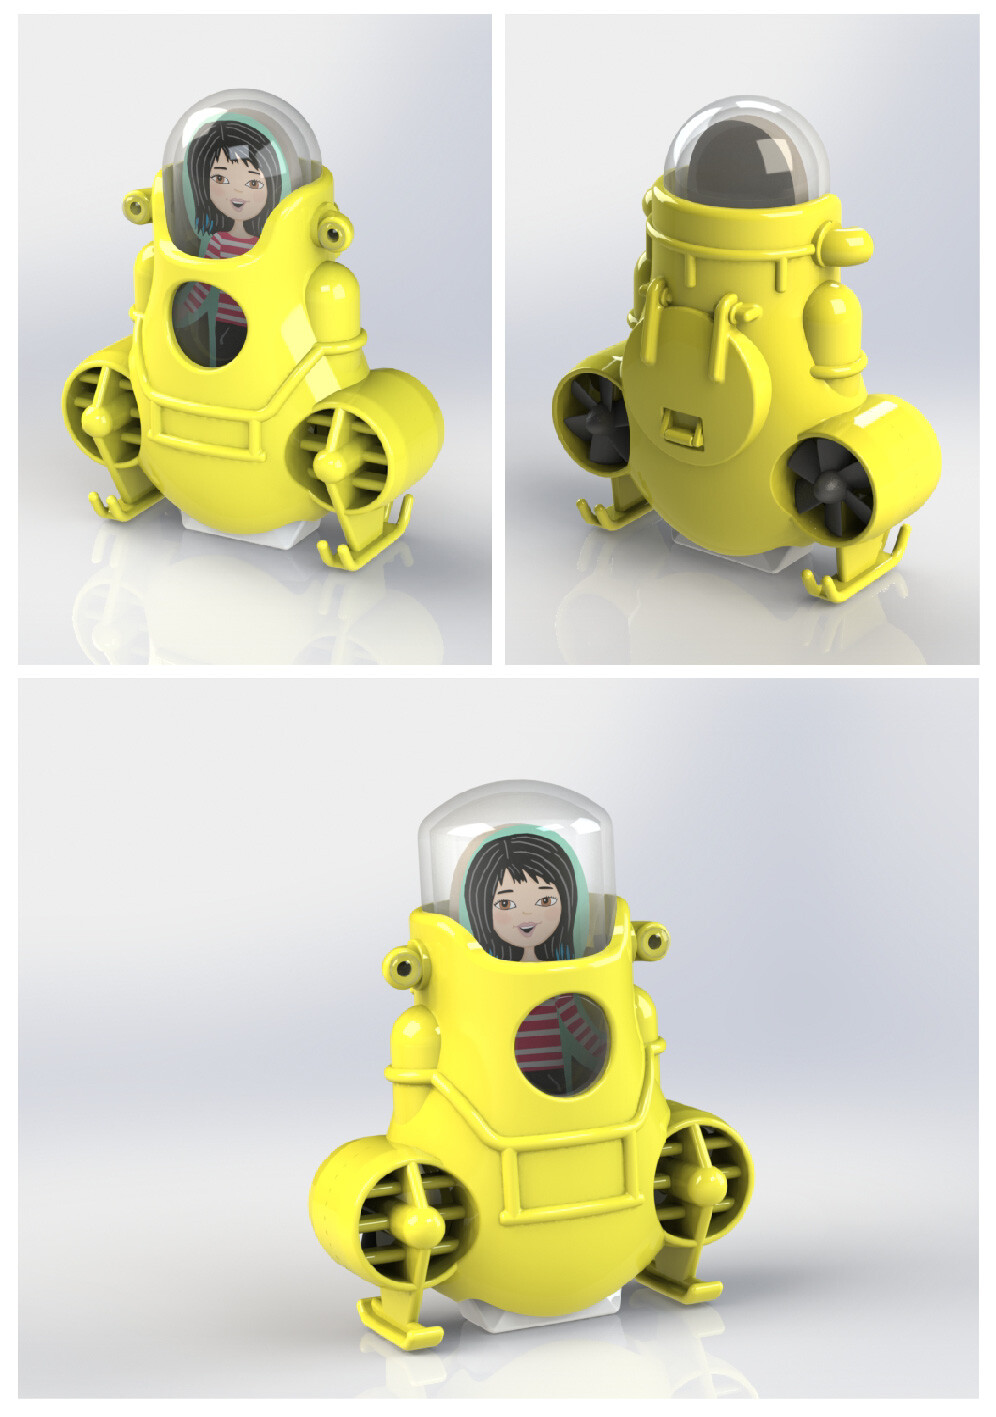 Solidworks renderings of the submersible: the bottom image is the final design with beefier landing skids and a squared-off canopy to accommodate more diverse hairstyles.